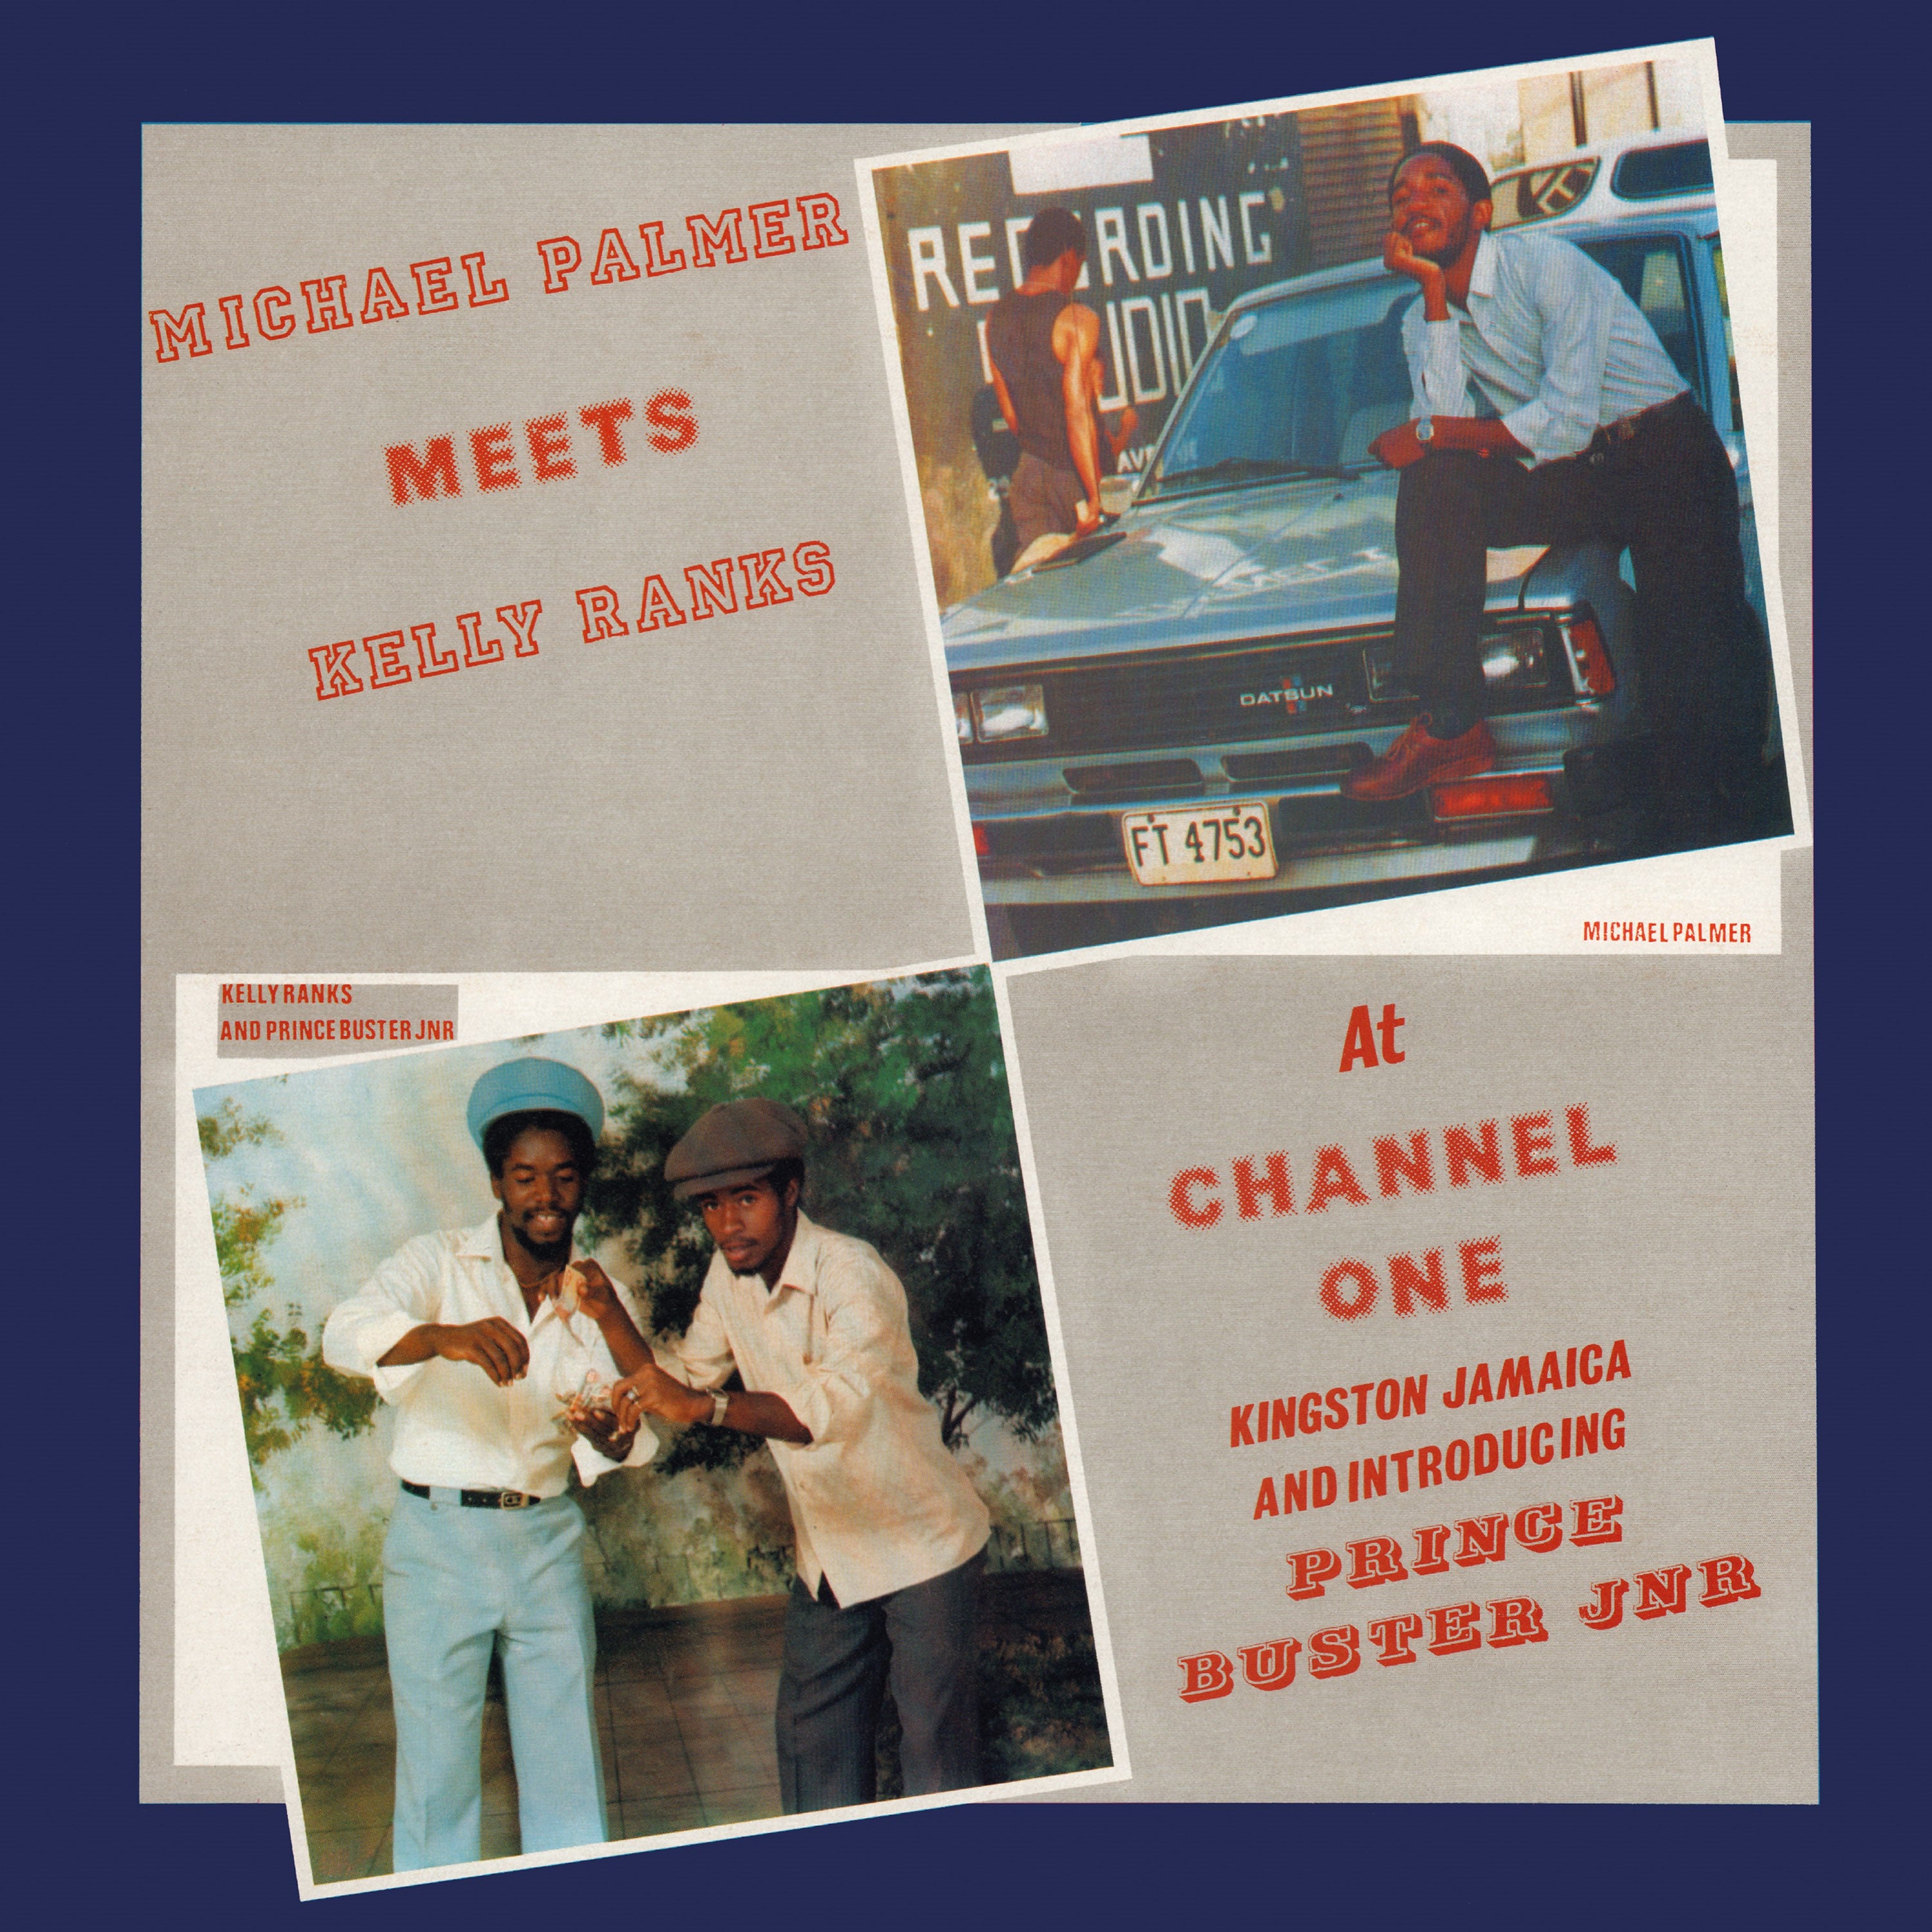 Michael Palmer - Meets Kelly Ranks At Channel One - Vinyl LP